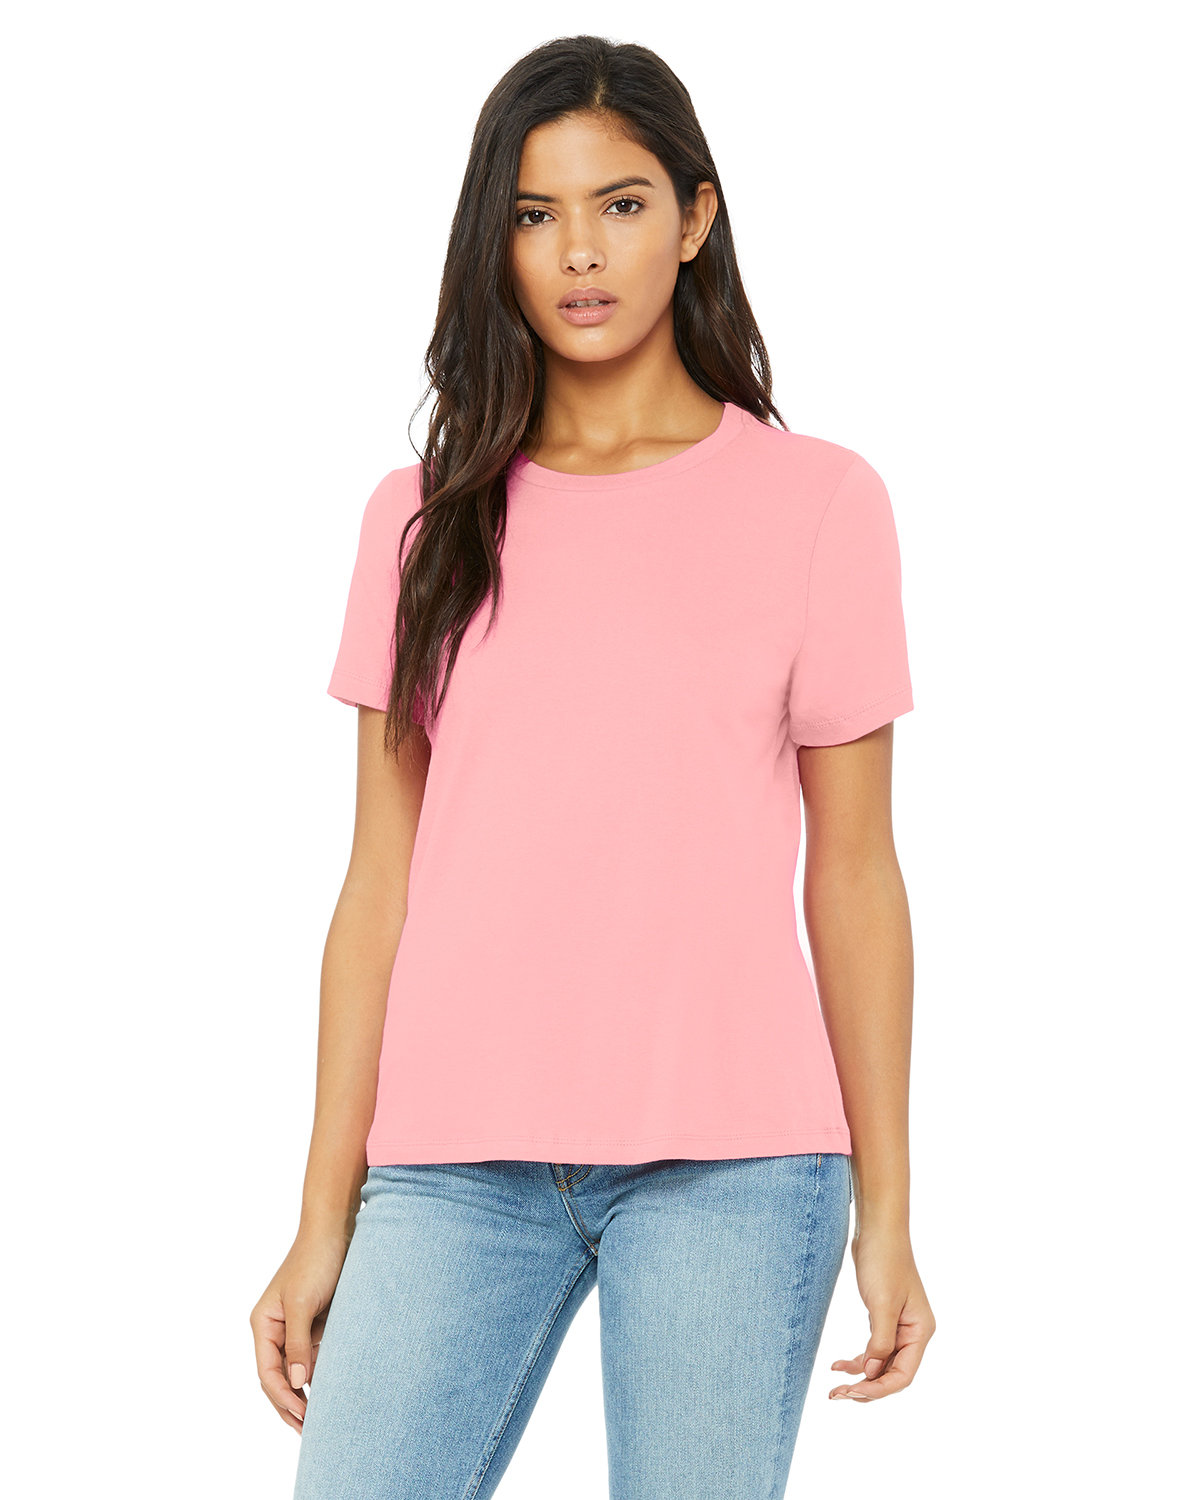 Bella + Canvas Ladies' Relaxed Jersey Short-Sleeve T-Shirt PINK 